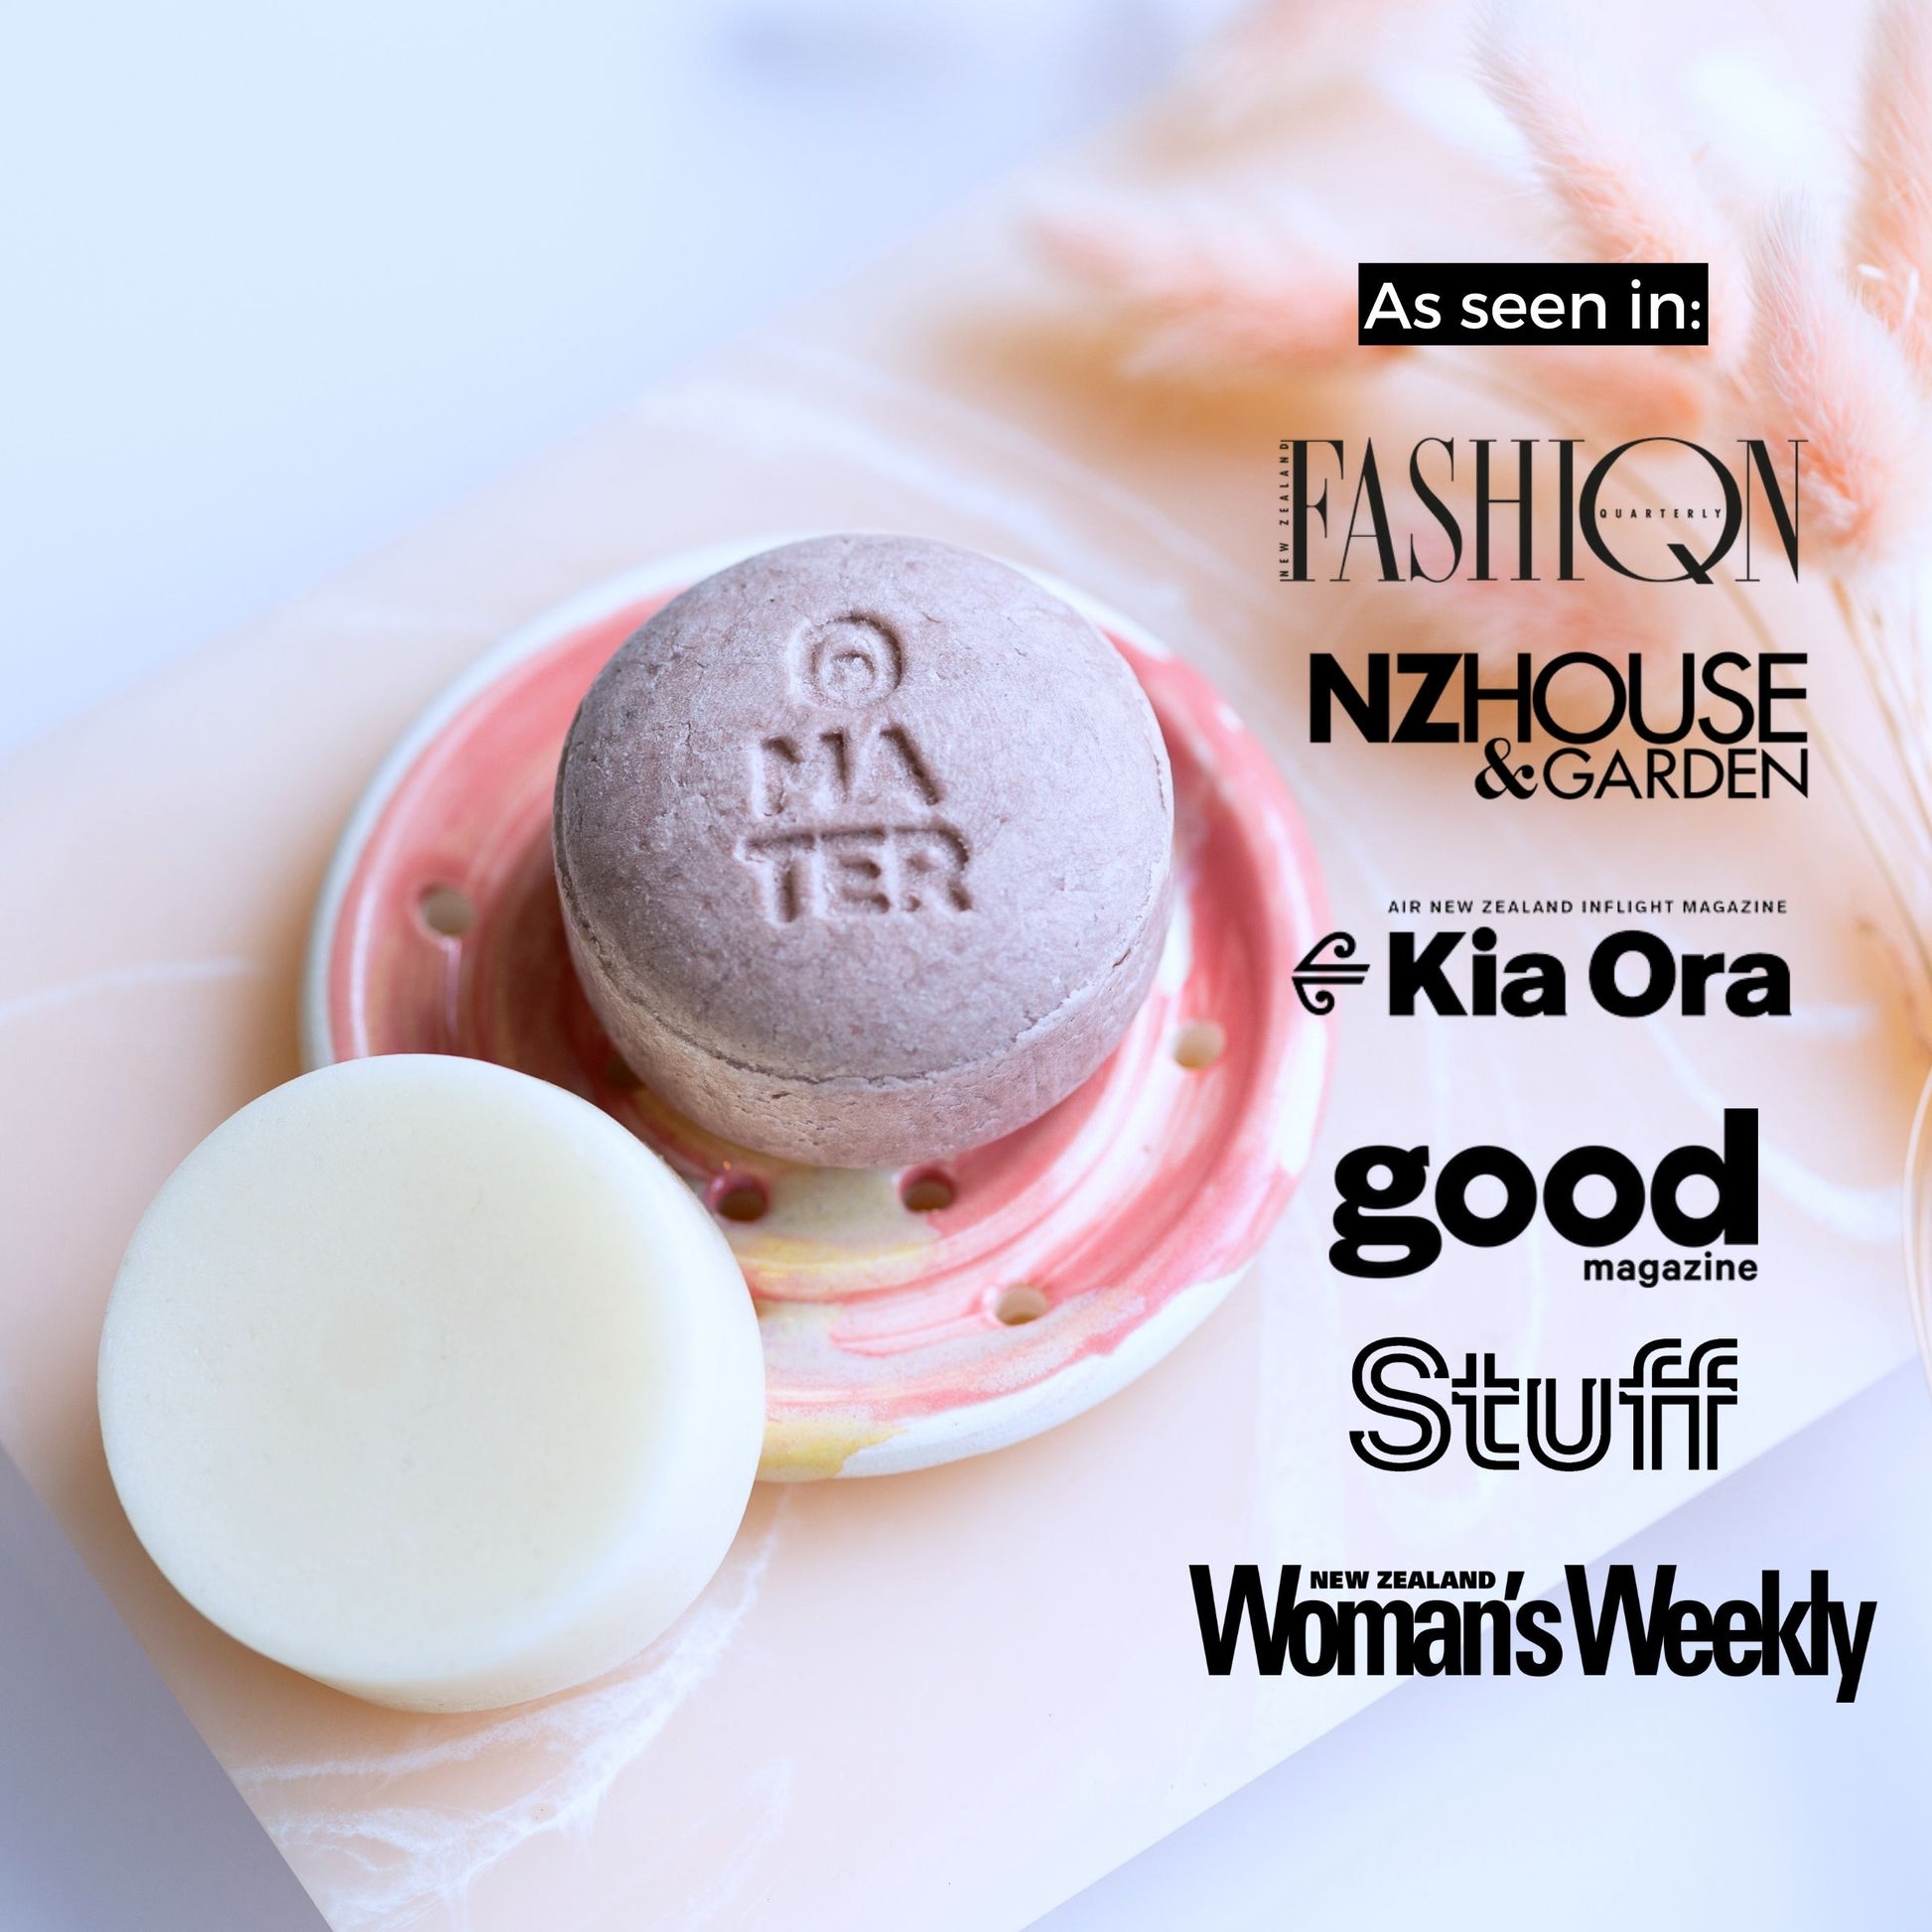 HAIR Ritual product shot T.L.C. Nourishing Shampoo Bar and Good Hair Days Supercharged Conditioner Bar with logos of magazines they have been featured in: Fashion Quarterly, NZ House & Garden, Air New Zealand Inflight Magazine, good magazine, Stuff, New Zealand Woman's Weekly